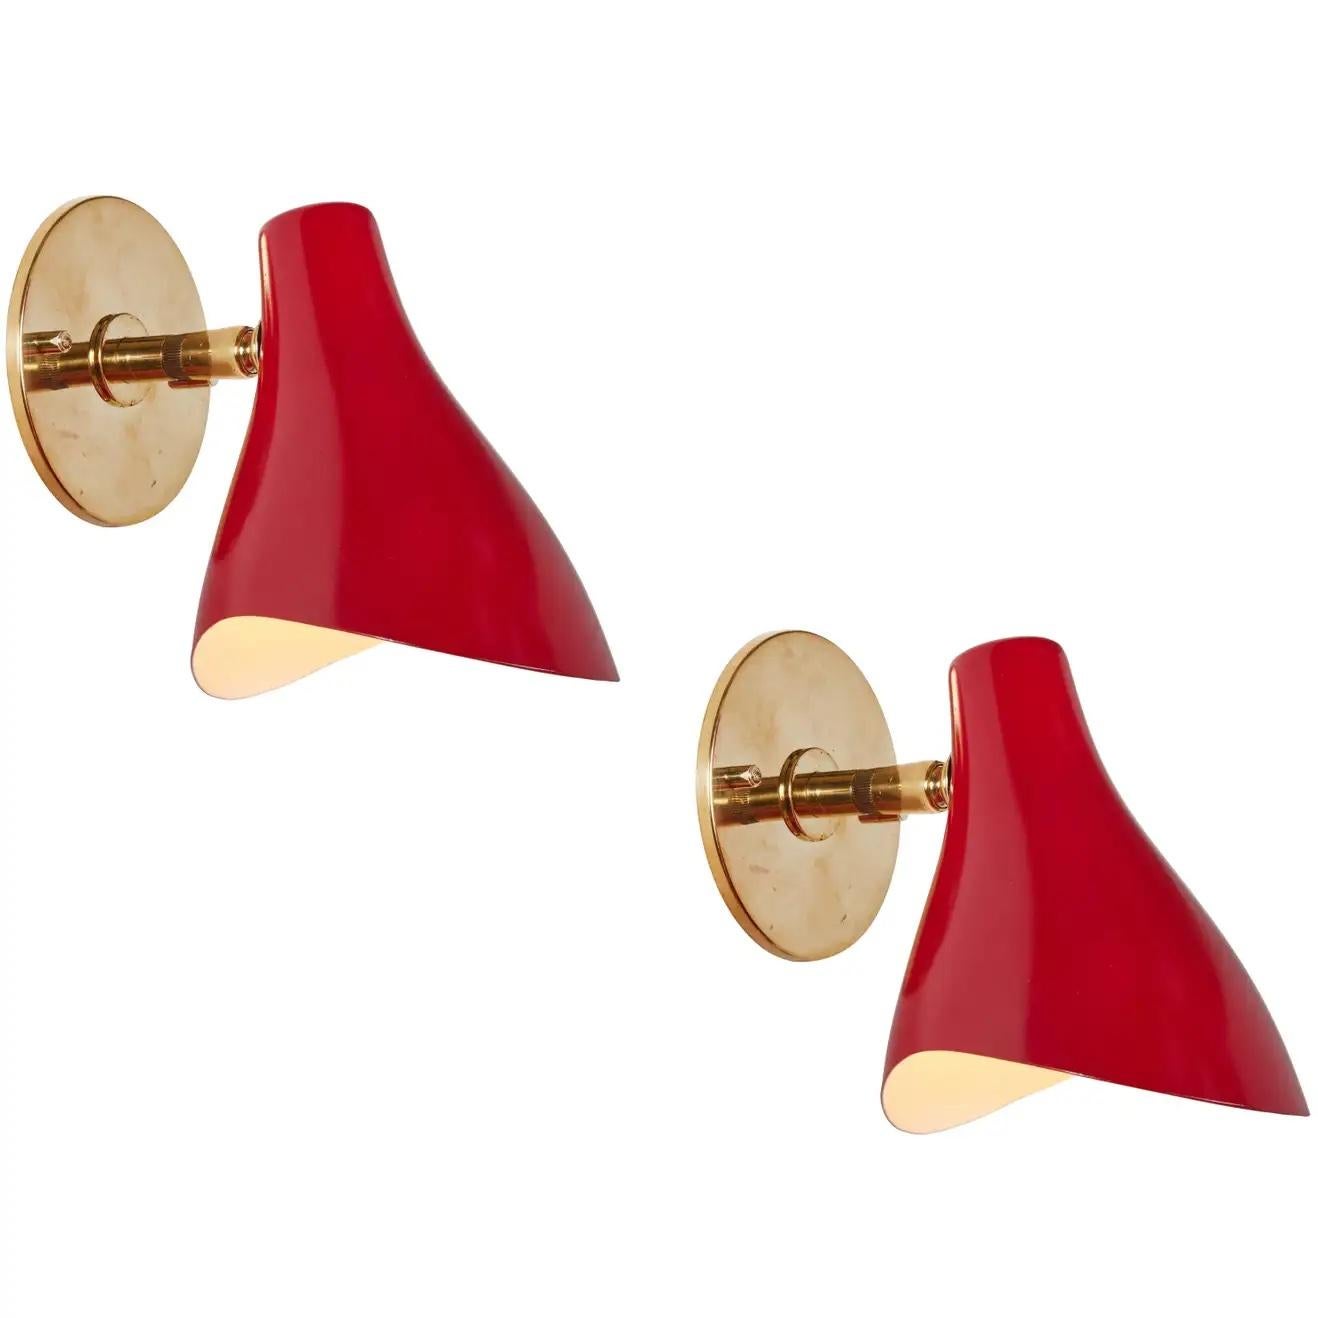 Painted Gino Sarfatti Model #10 Sconce in Red for Arteluce For Sale